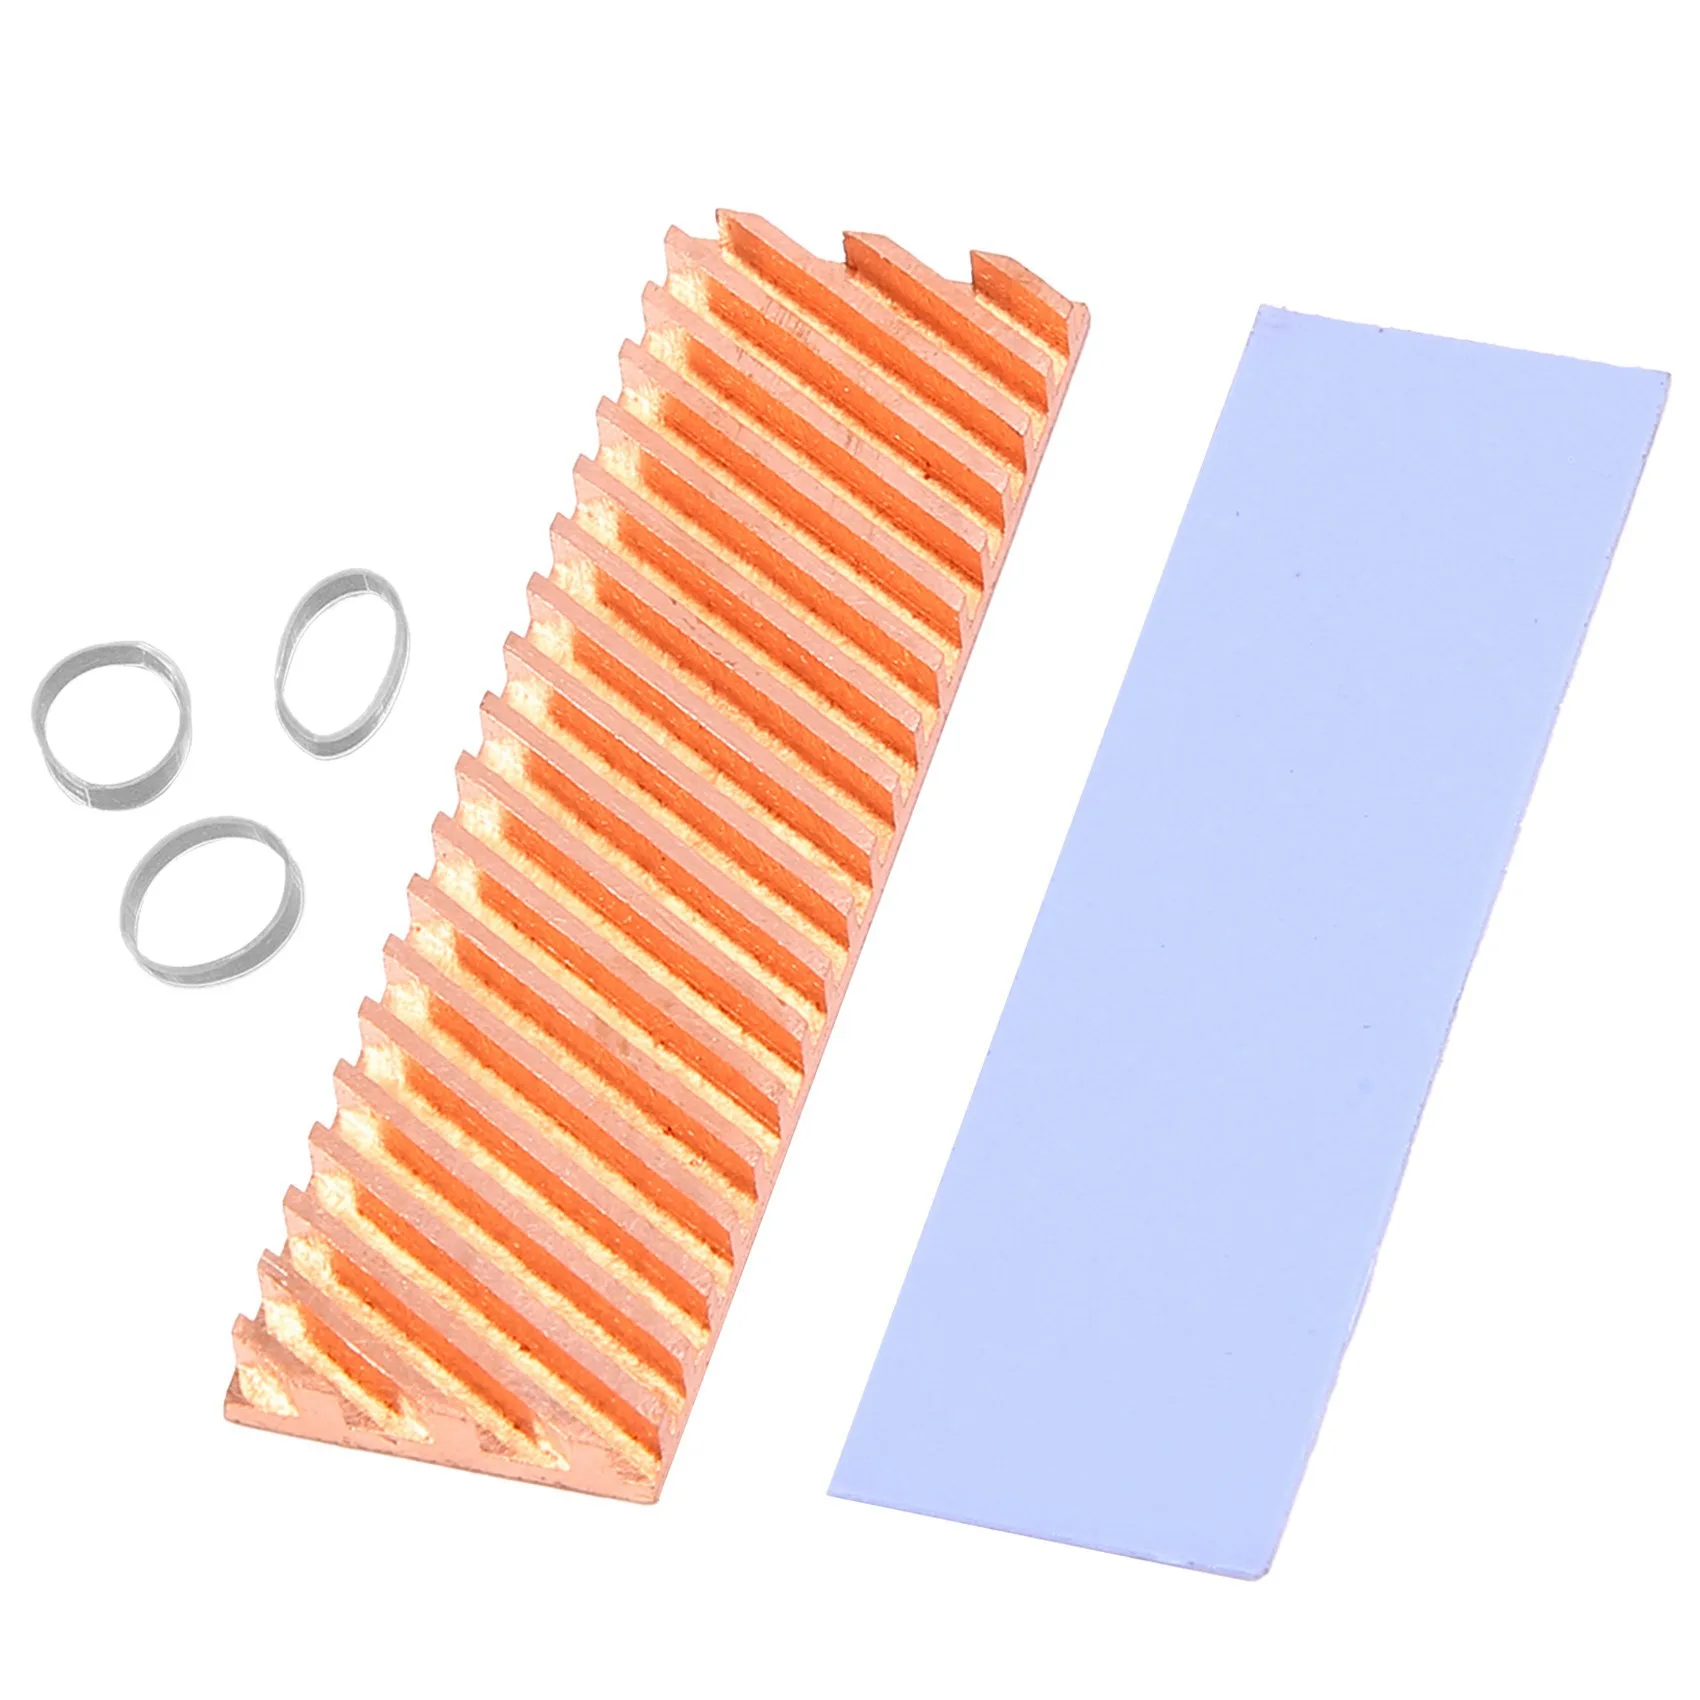 

M.2 SSD NVMe Heat Sink M2 2280 Solid State Hard Disk Copper Heatsink Gasket with Thermal Silicone Pad PC Accessories